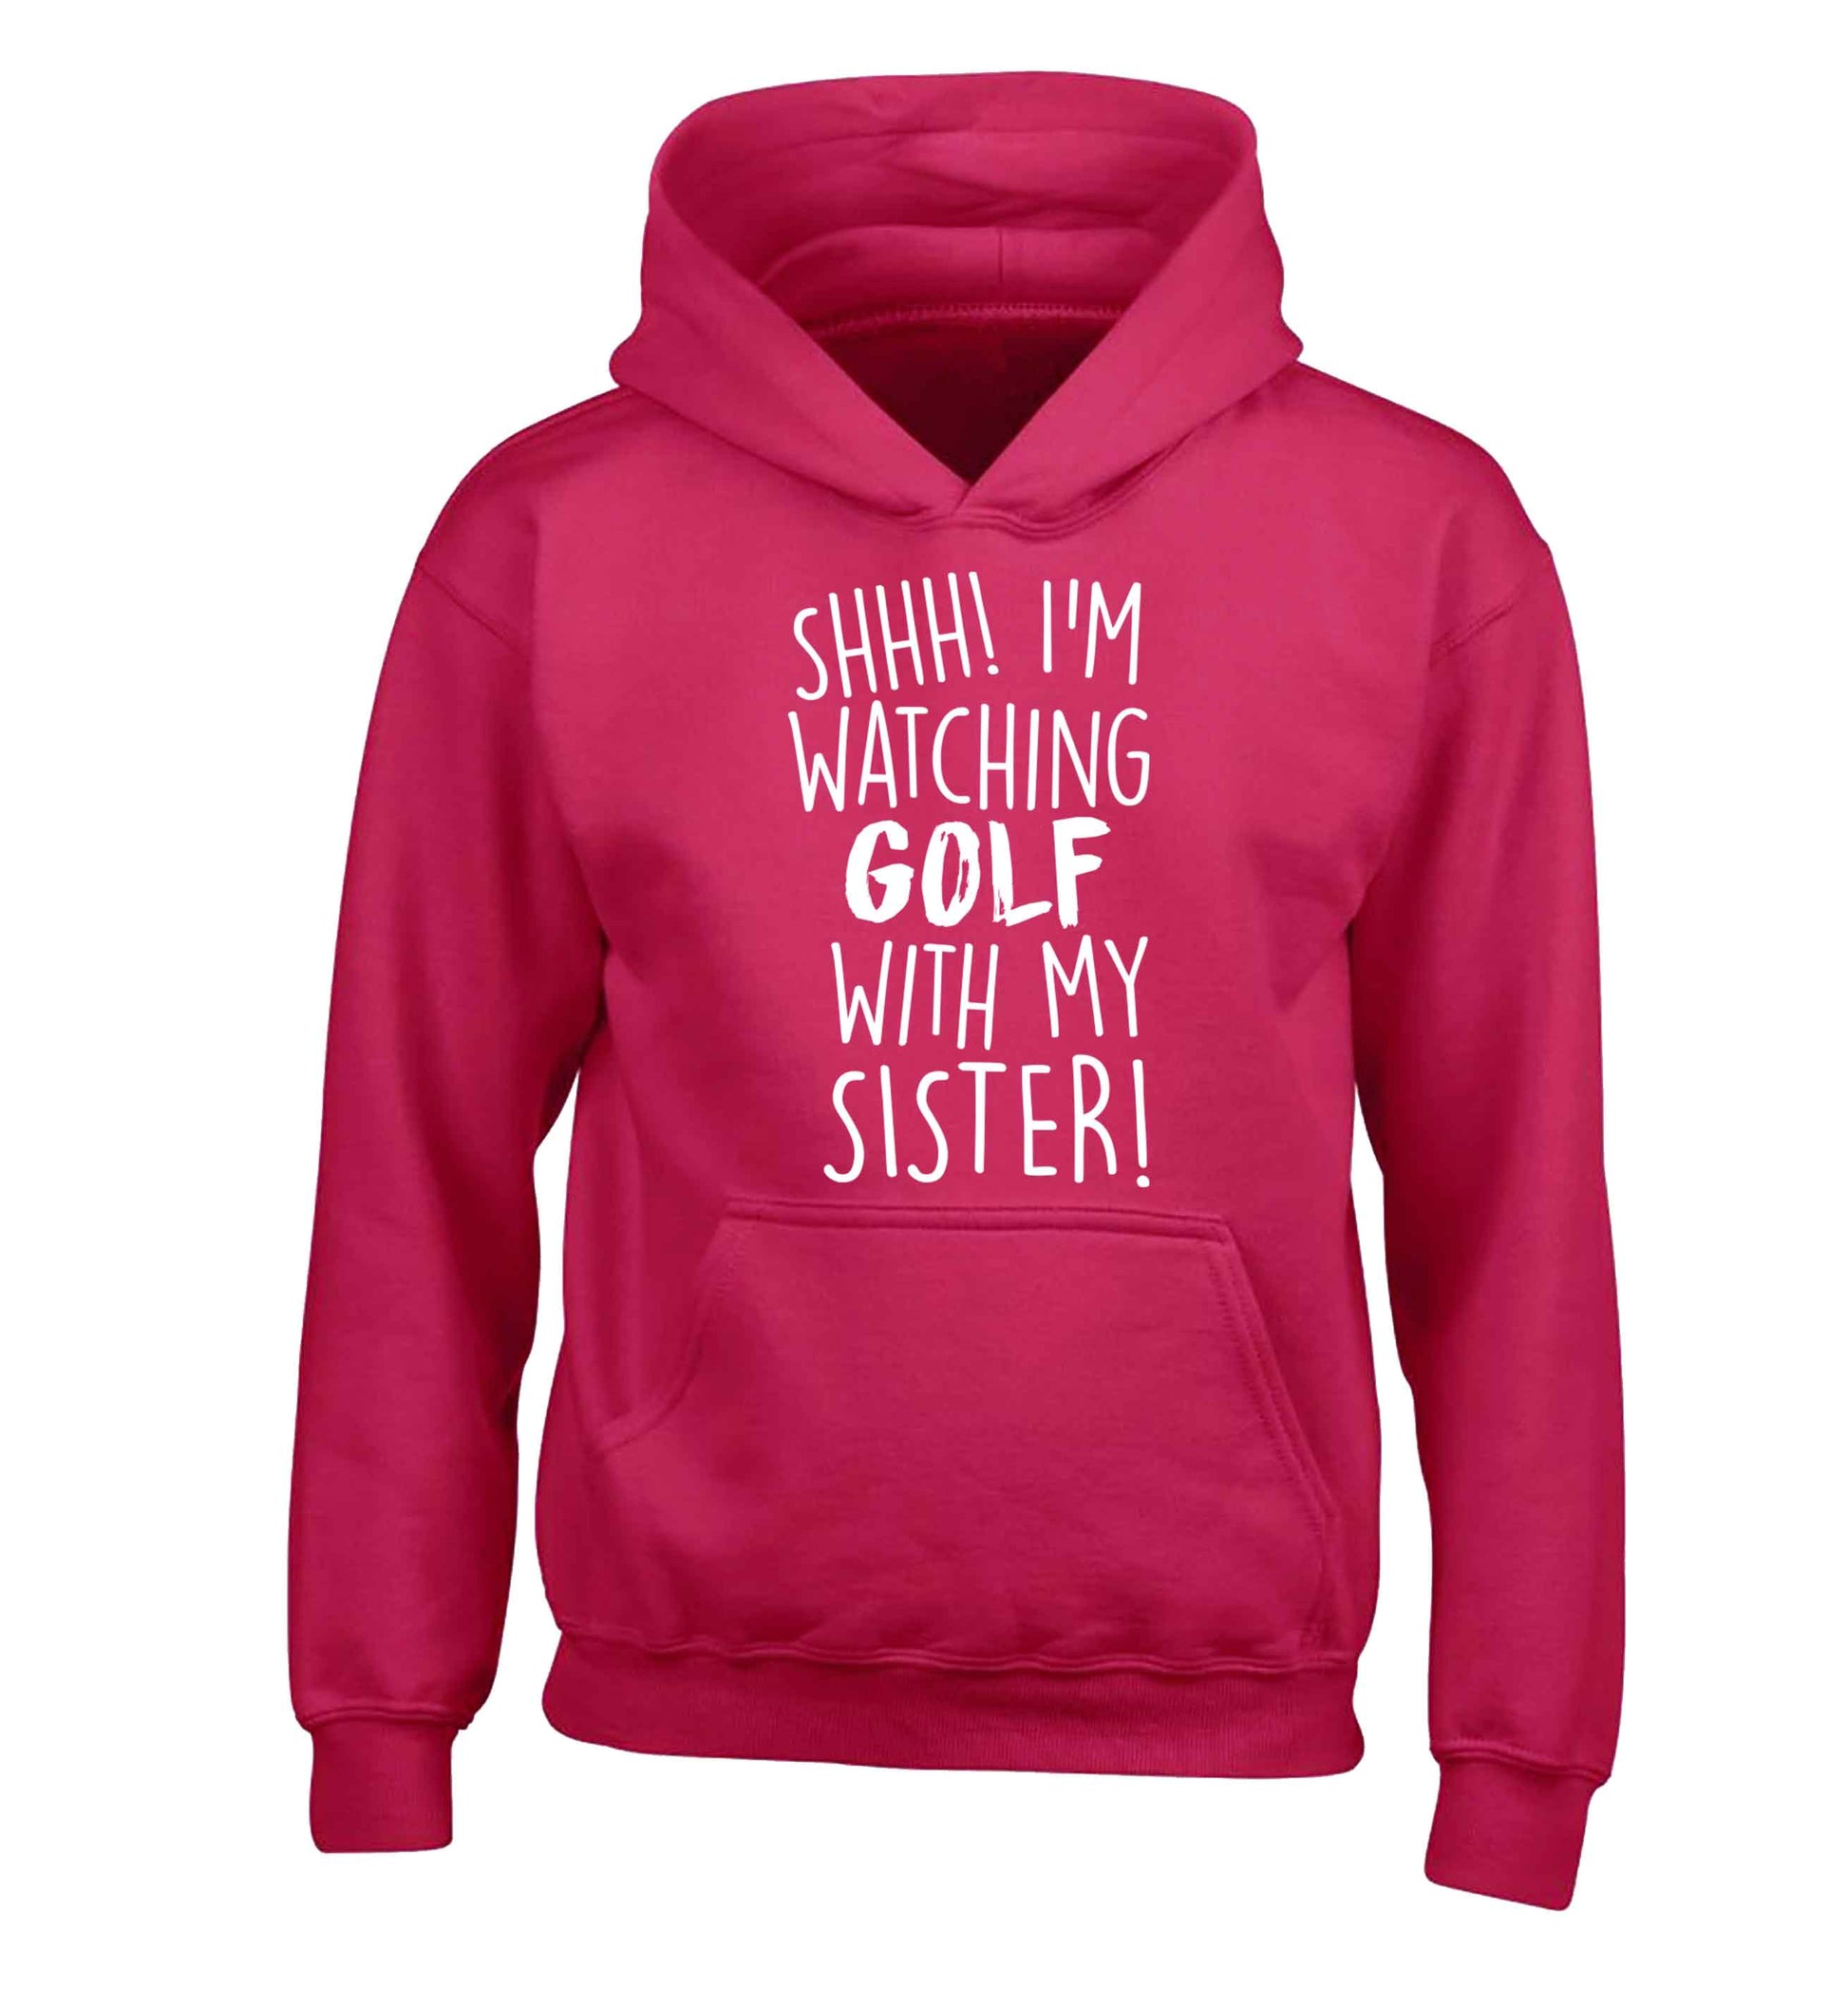 Shh I'm watching golf with my sister children's pink hoodie 12-13 Years